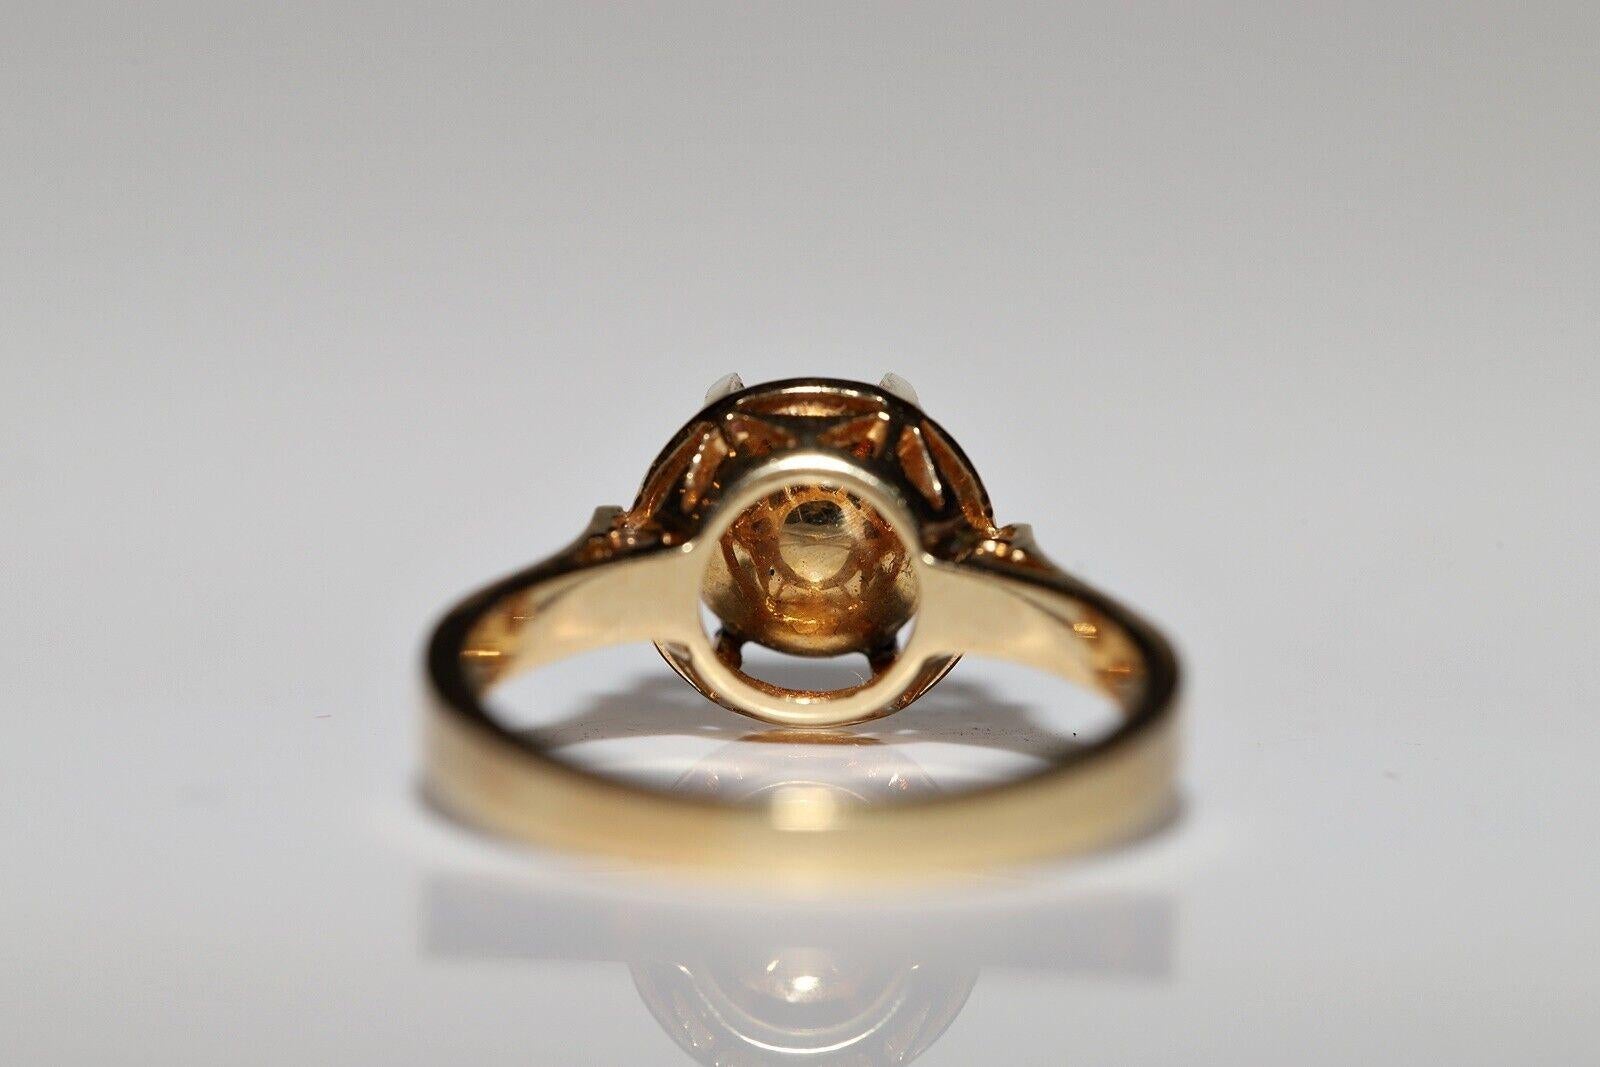 Vintage Circa 1970s 14k Gold Natural Rose Cut Diamond Solitaire Ring In Good Condition For Sale In Fatih/İstanbul, 34